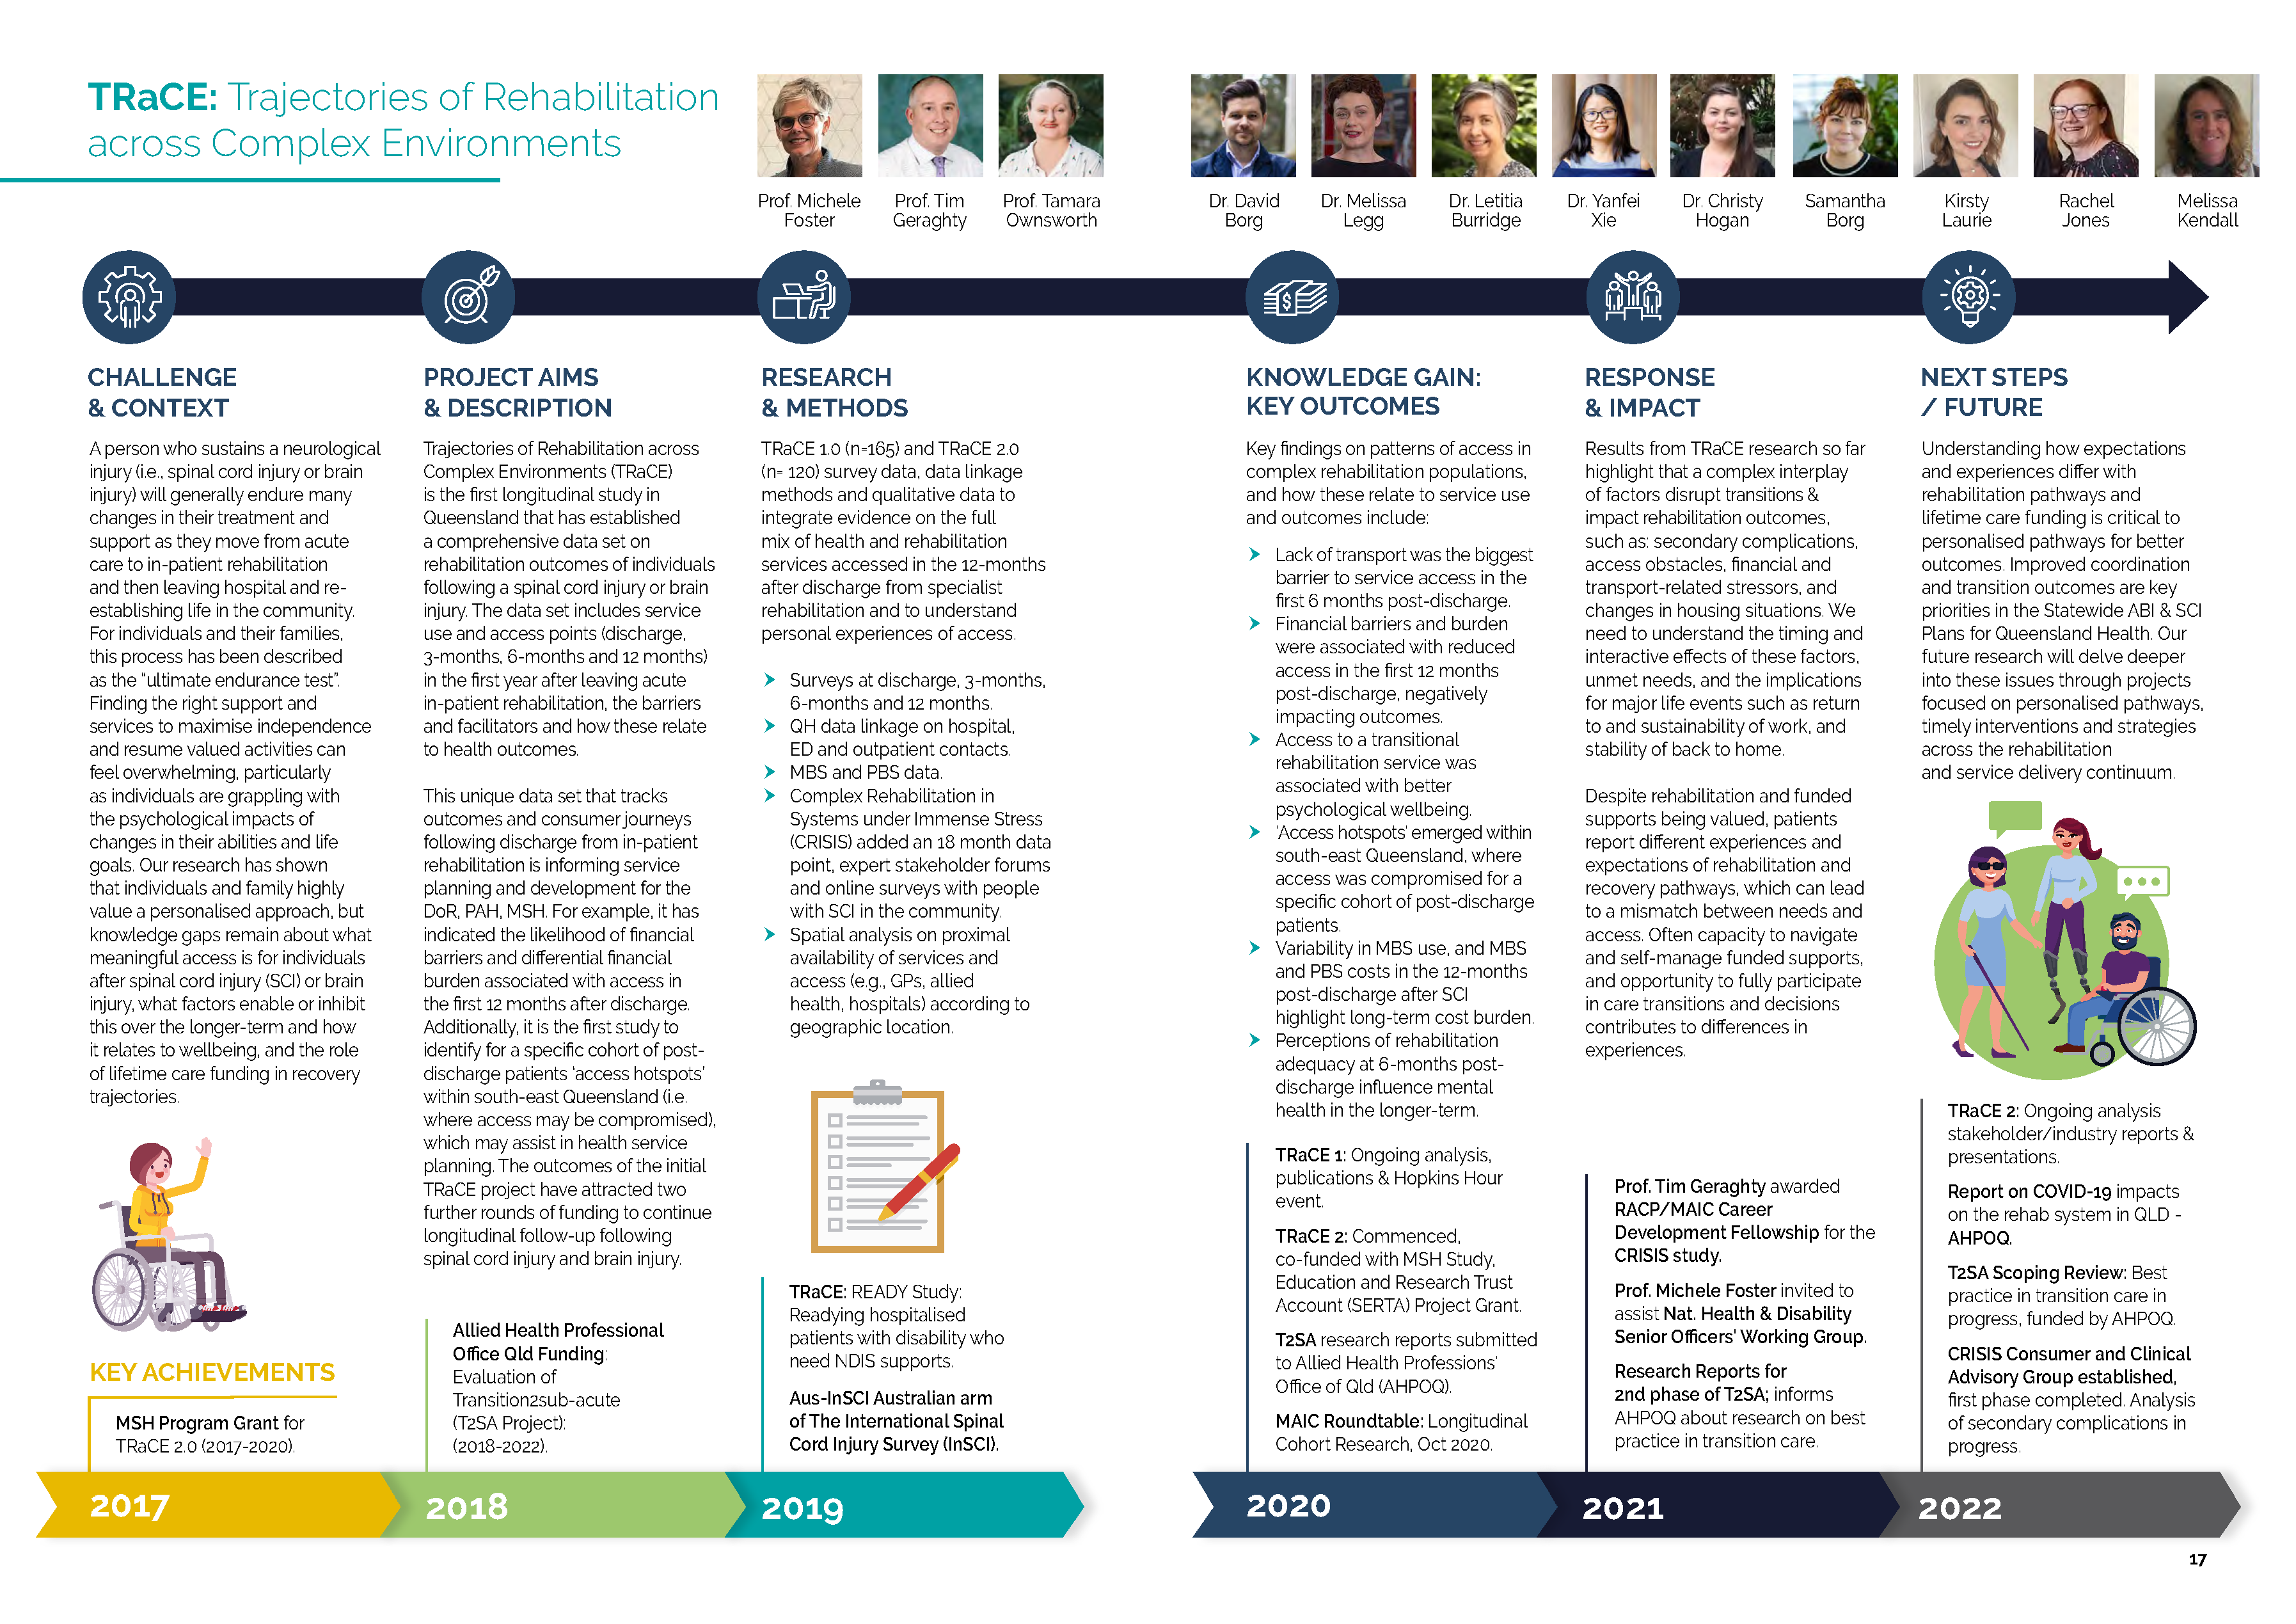 Two pages taken from The Hopkins Centre's 5-year report show the title of the project and profile images of the 3 executives and 9 researchers involved in the project, along the top of the page. Six banners extend across the bottom of the page, in the Hopkins Centre colours, below major project successes and milestones. The centre of the page includes an outline the Challenge & Context, Project Aims & Description, Research Methods, Key Outcomes, Response & Impact and Next Steps of the TRaCE Project.